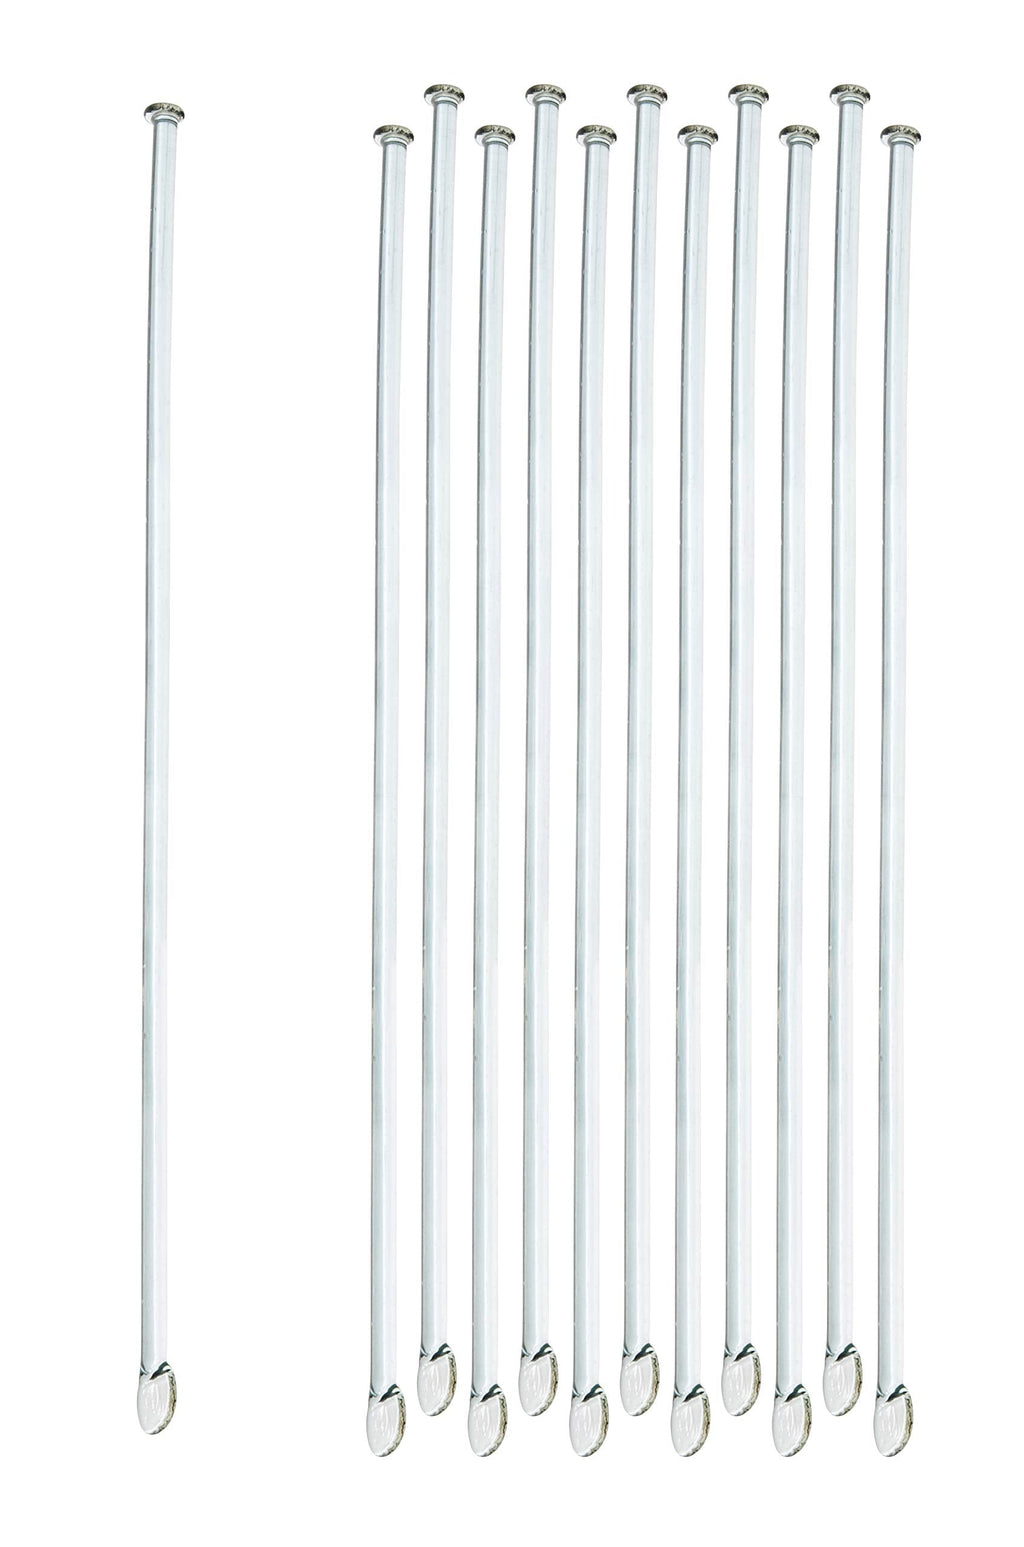  [AUSTRALIA] - 10PK Glass Stirring Rods, 7.9" - Spade & Button Ends, 6mm Diameter - Excellent for Laboratory or Home Use - Borosilicate 3.3 Glass - Eisco Labs